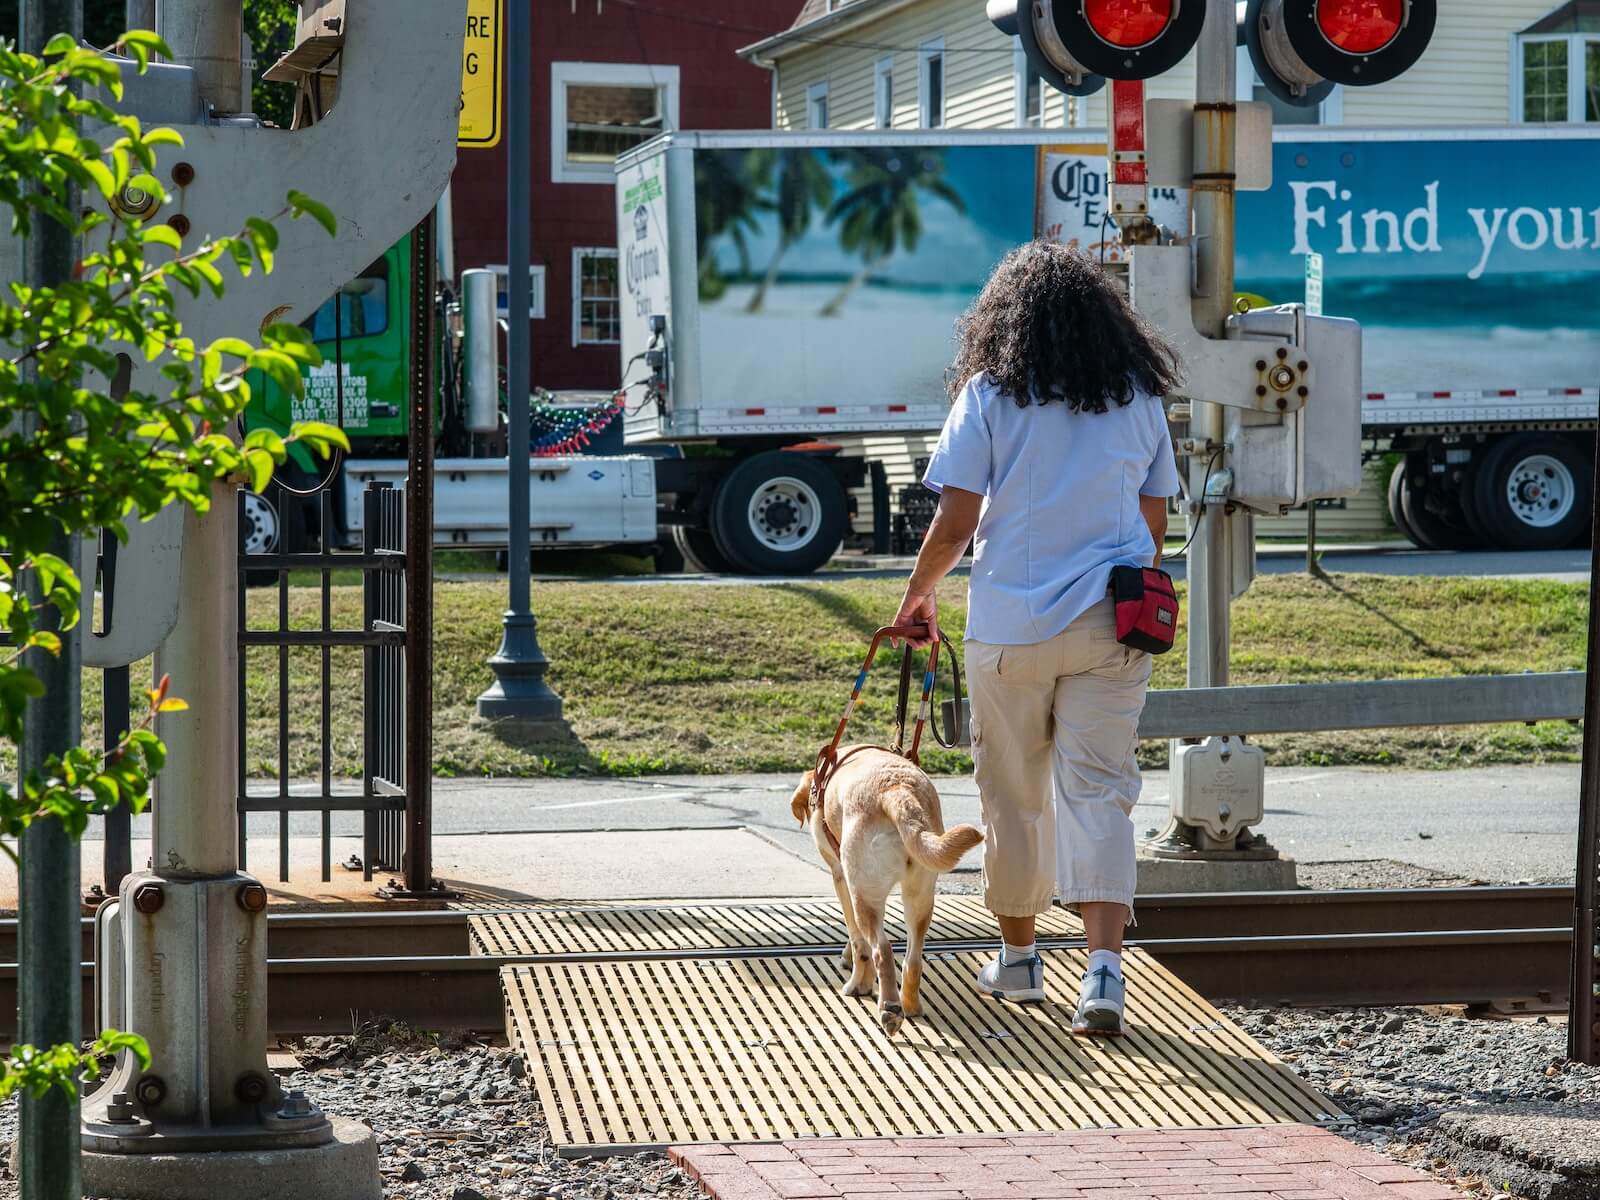 GDMI and yellow guide dog in training walk over railroad pedestrian crossing